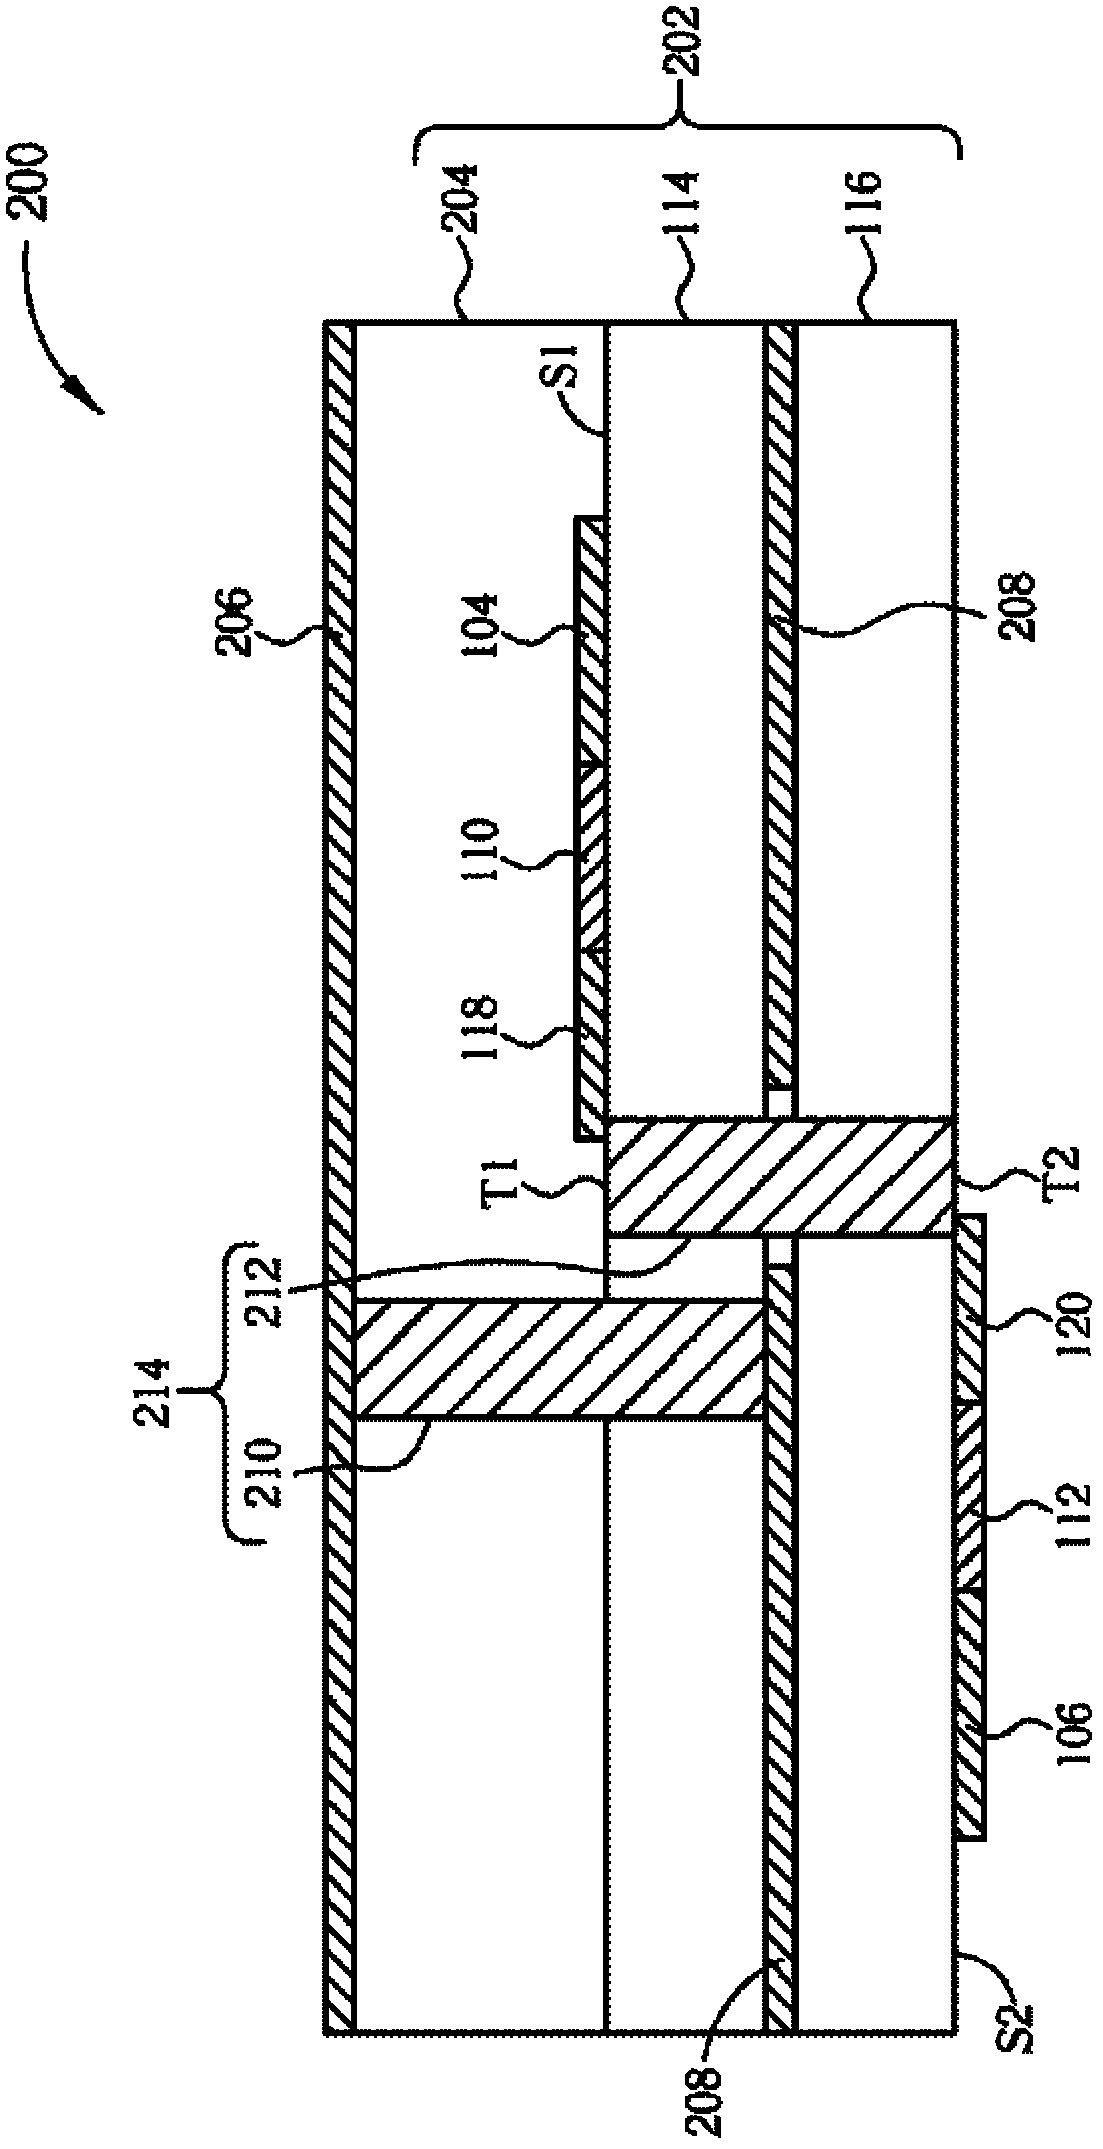 Circuit device with signal line transition element